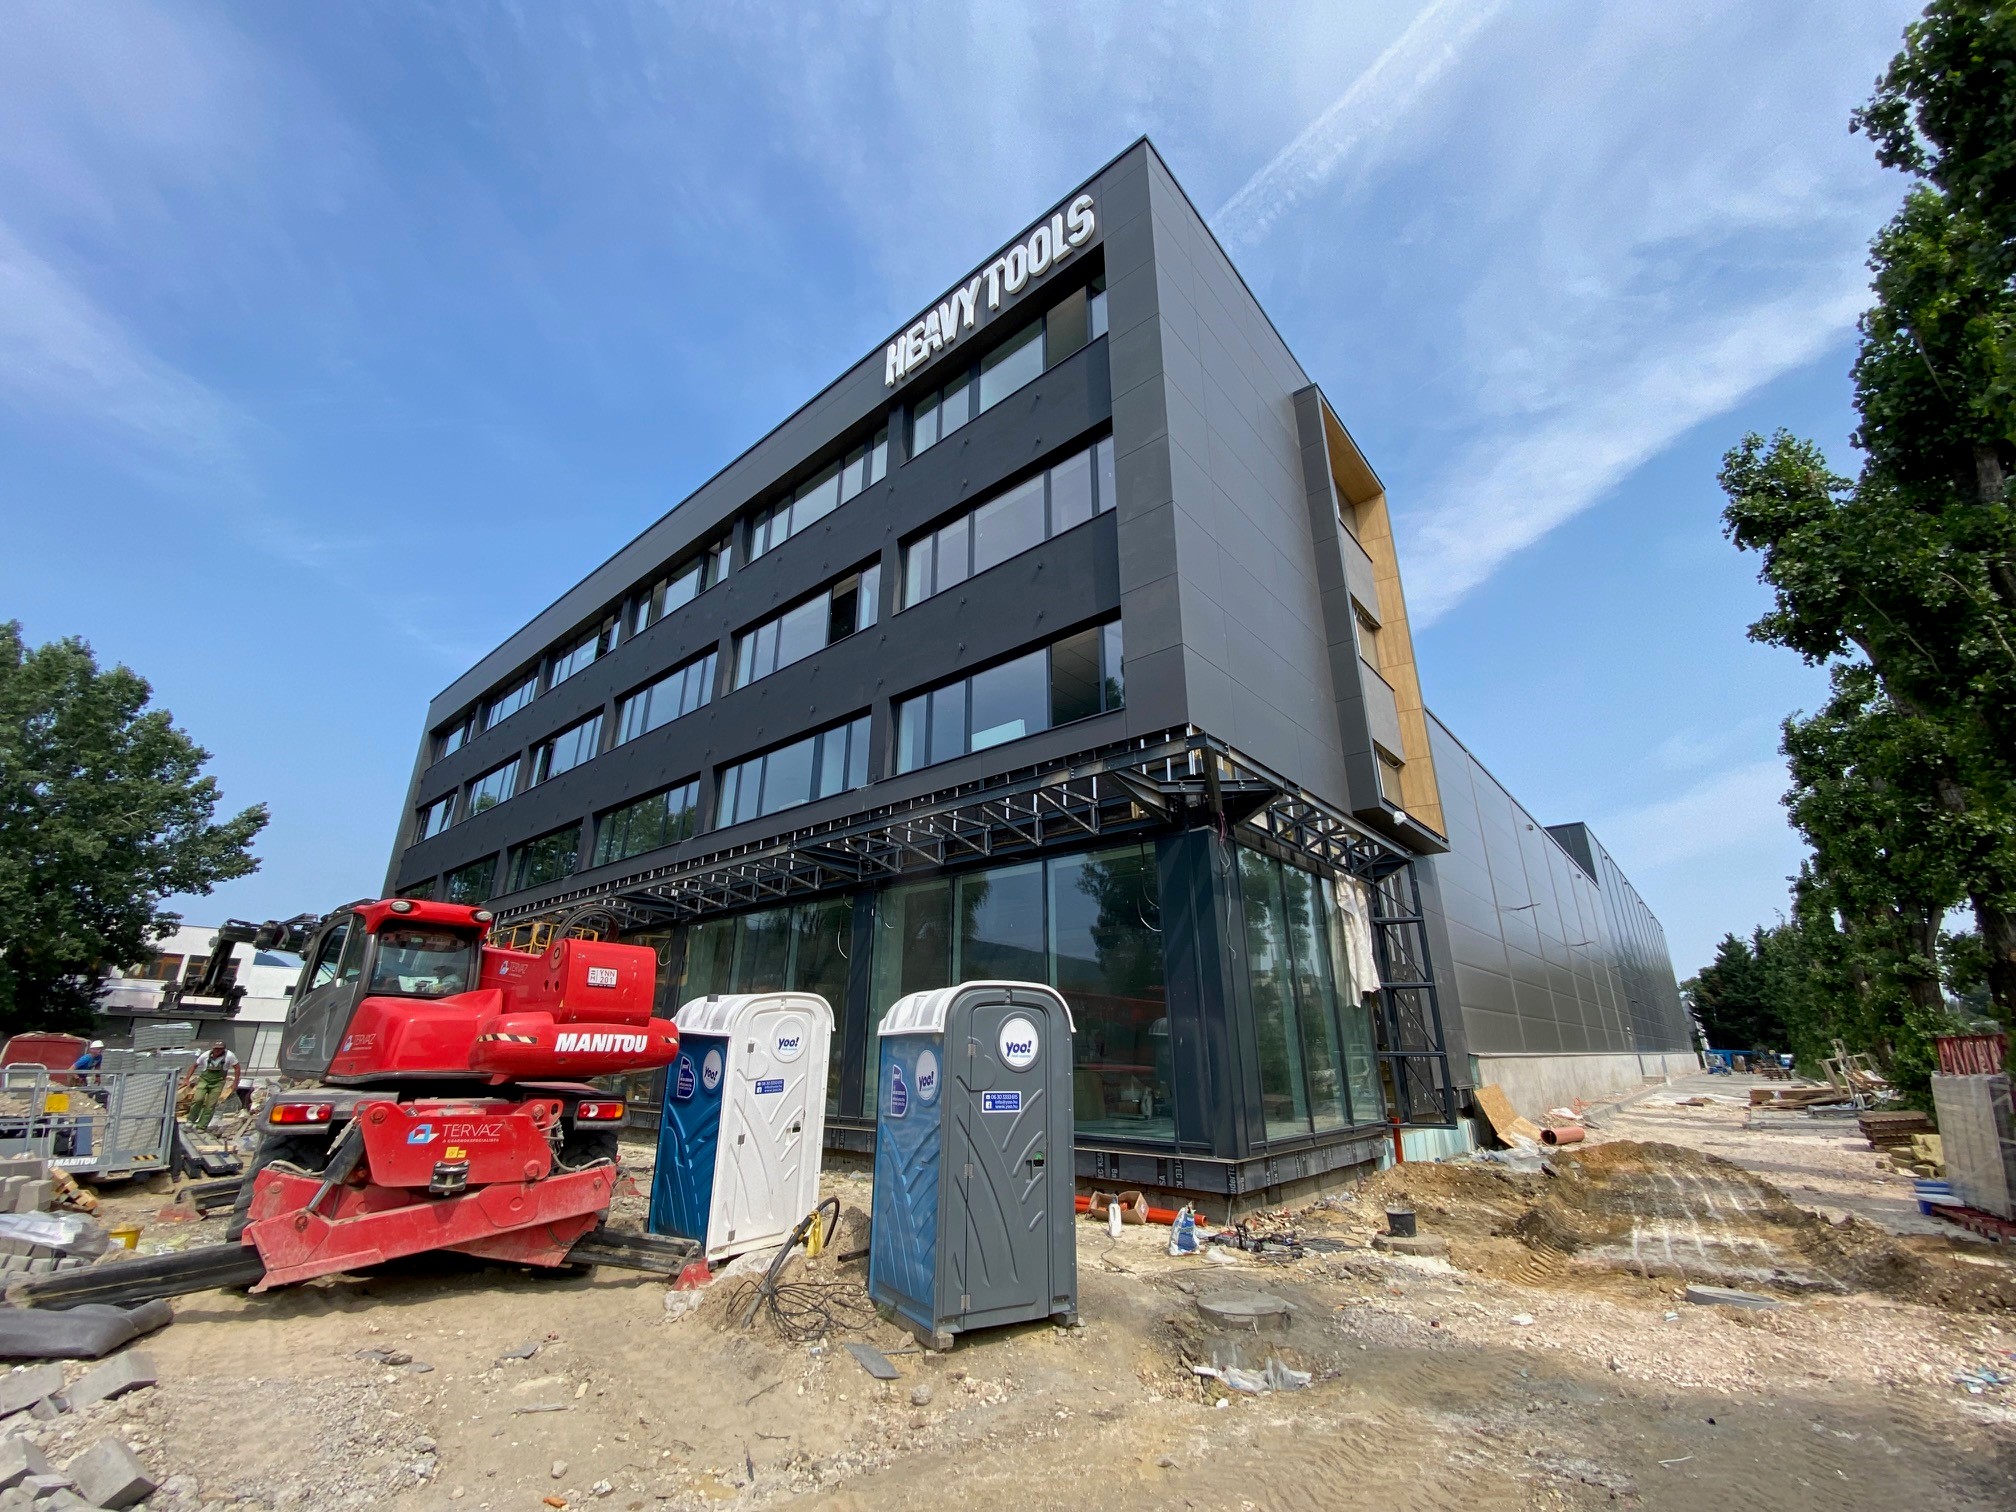 The general construction works of the new site of Prémium Sport Kft., which distributes the Heavy Tools clothing brand, are nearing completion.